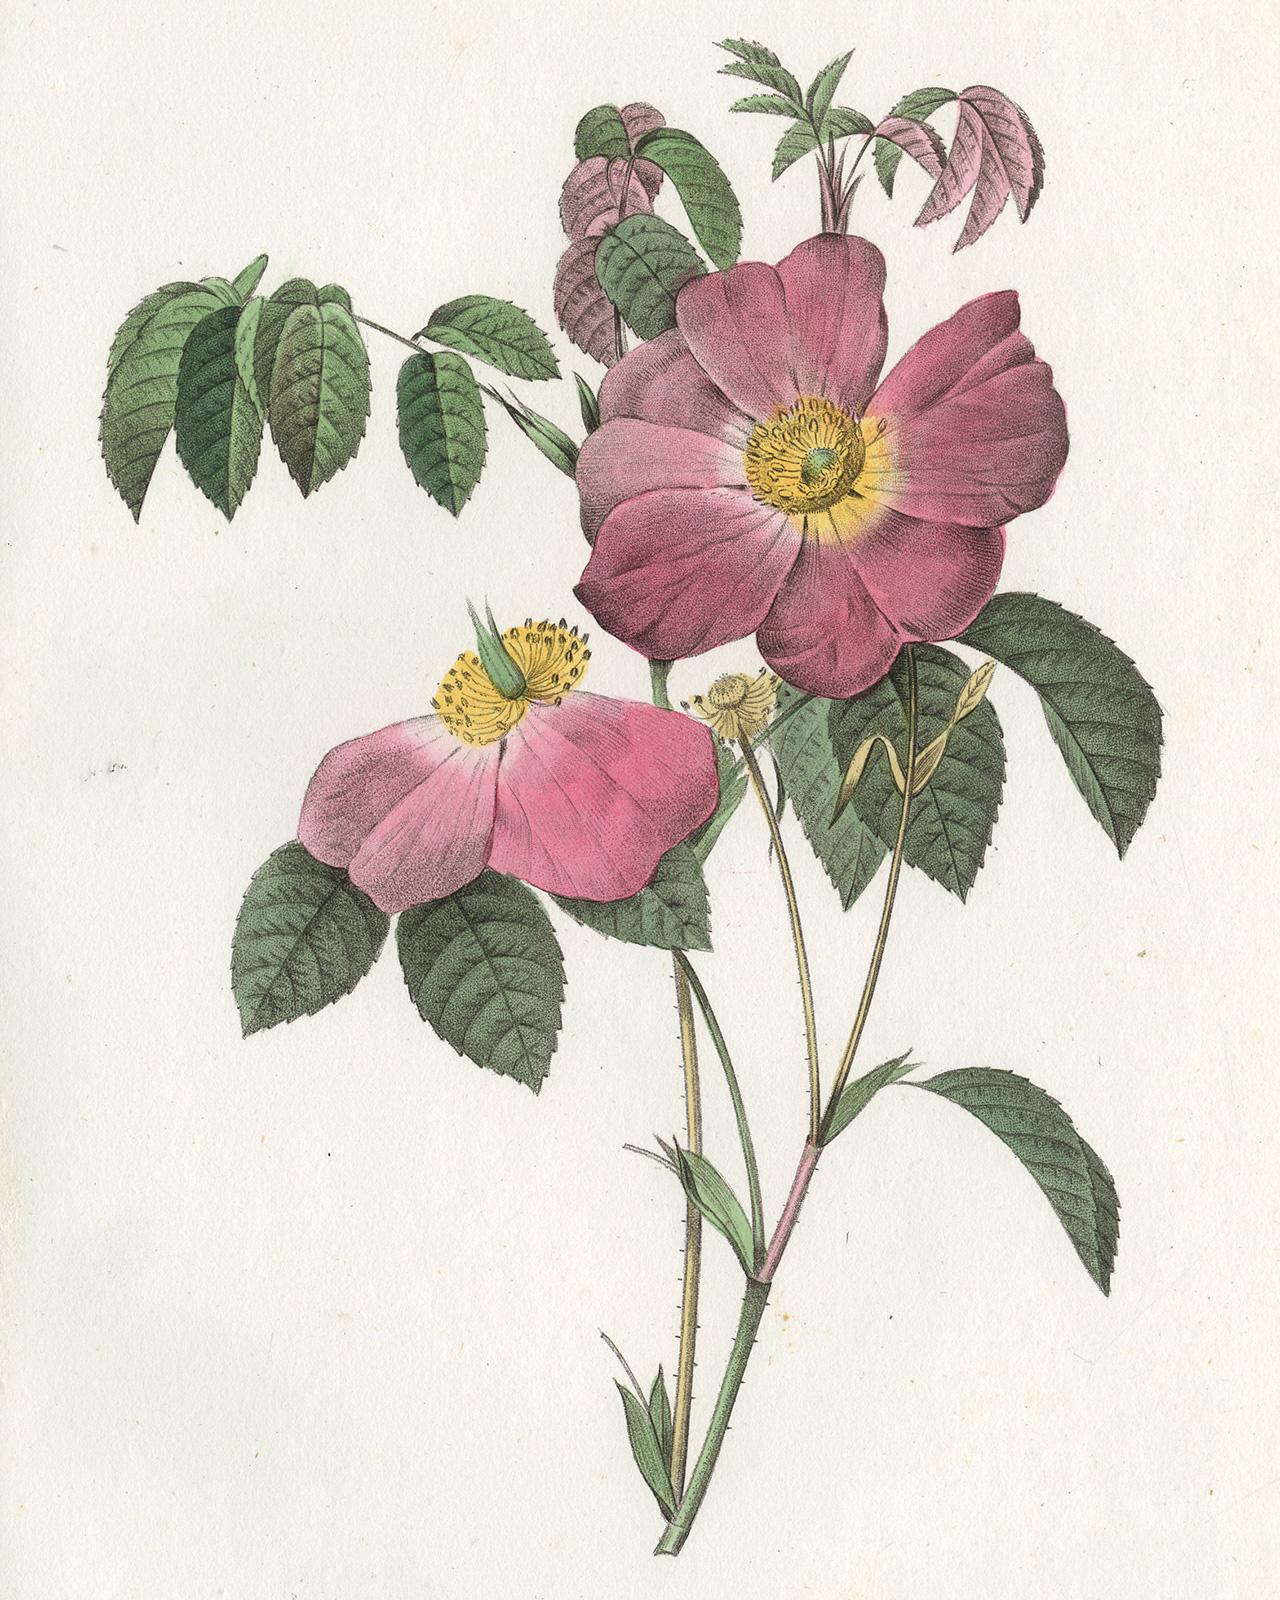 French Rose by Redoute - Les Roses - Handcoloured engraving - 19th century - Print by Pierre-Joseph Redouté